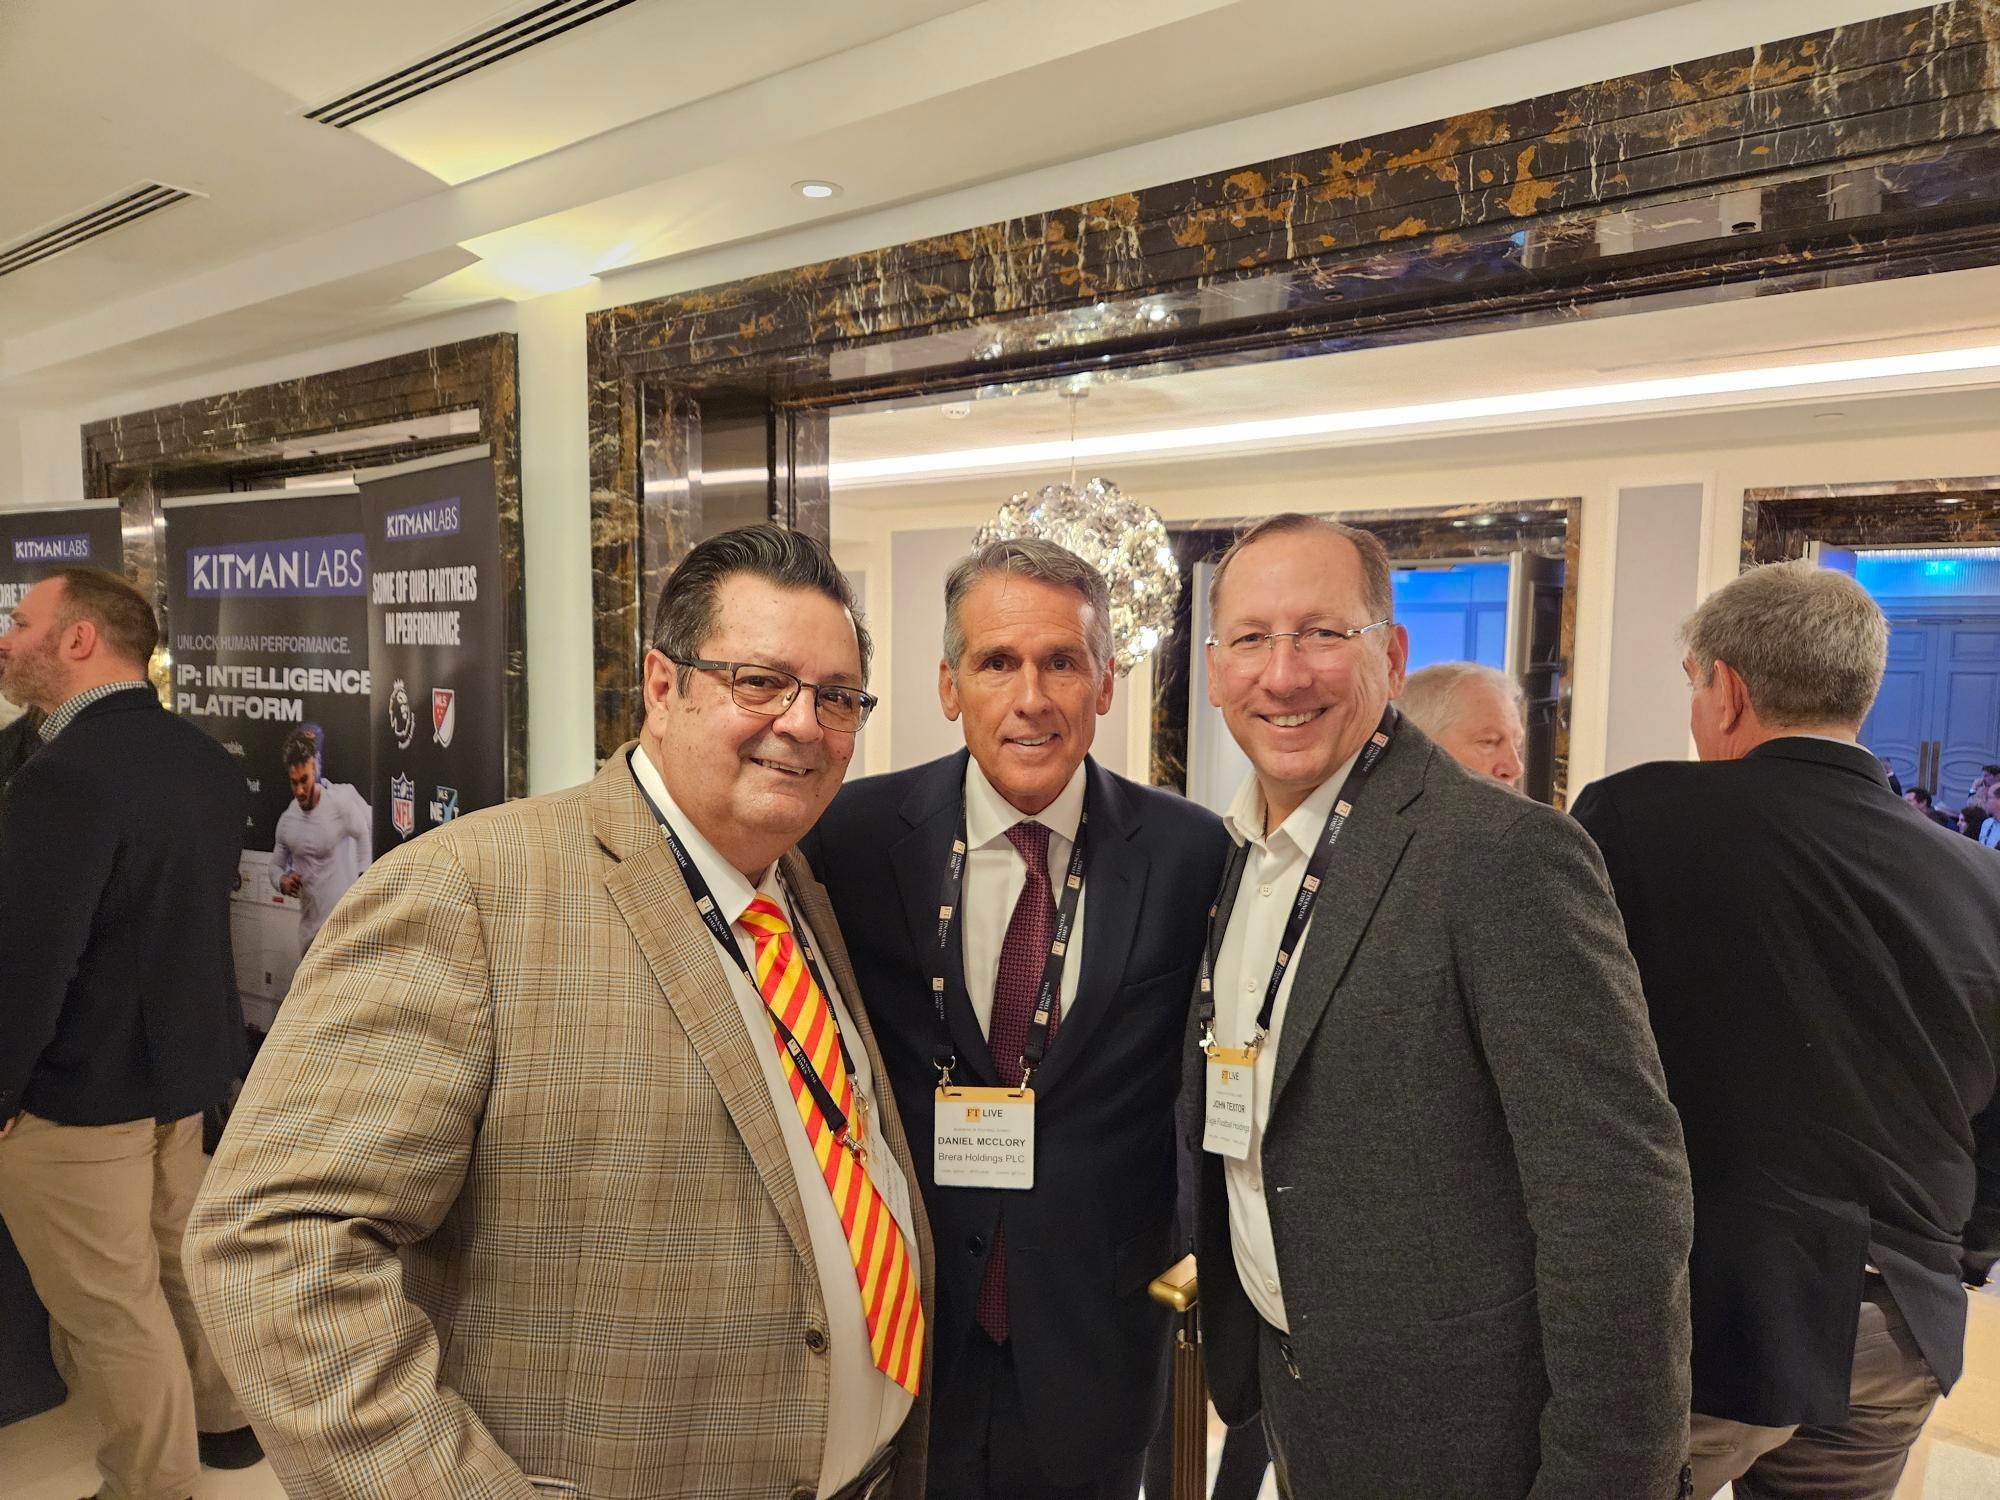 Pierre Galoppi (left), Executive Chairman Dan McClory (center), and John Textor (right) the majority owner and chairman of Eagle Football Holdings Limited, the leading shareholder of professional football clubs Botafogo (Brazil), Crystal Palace (England), Olympique Lyonnais (France), Olympique Lyonnais Féminin (France) and RWD Molenbeek (Belgium).